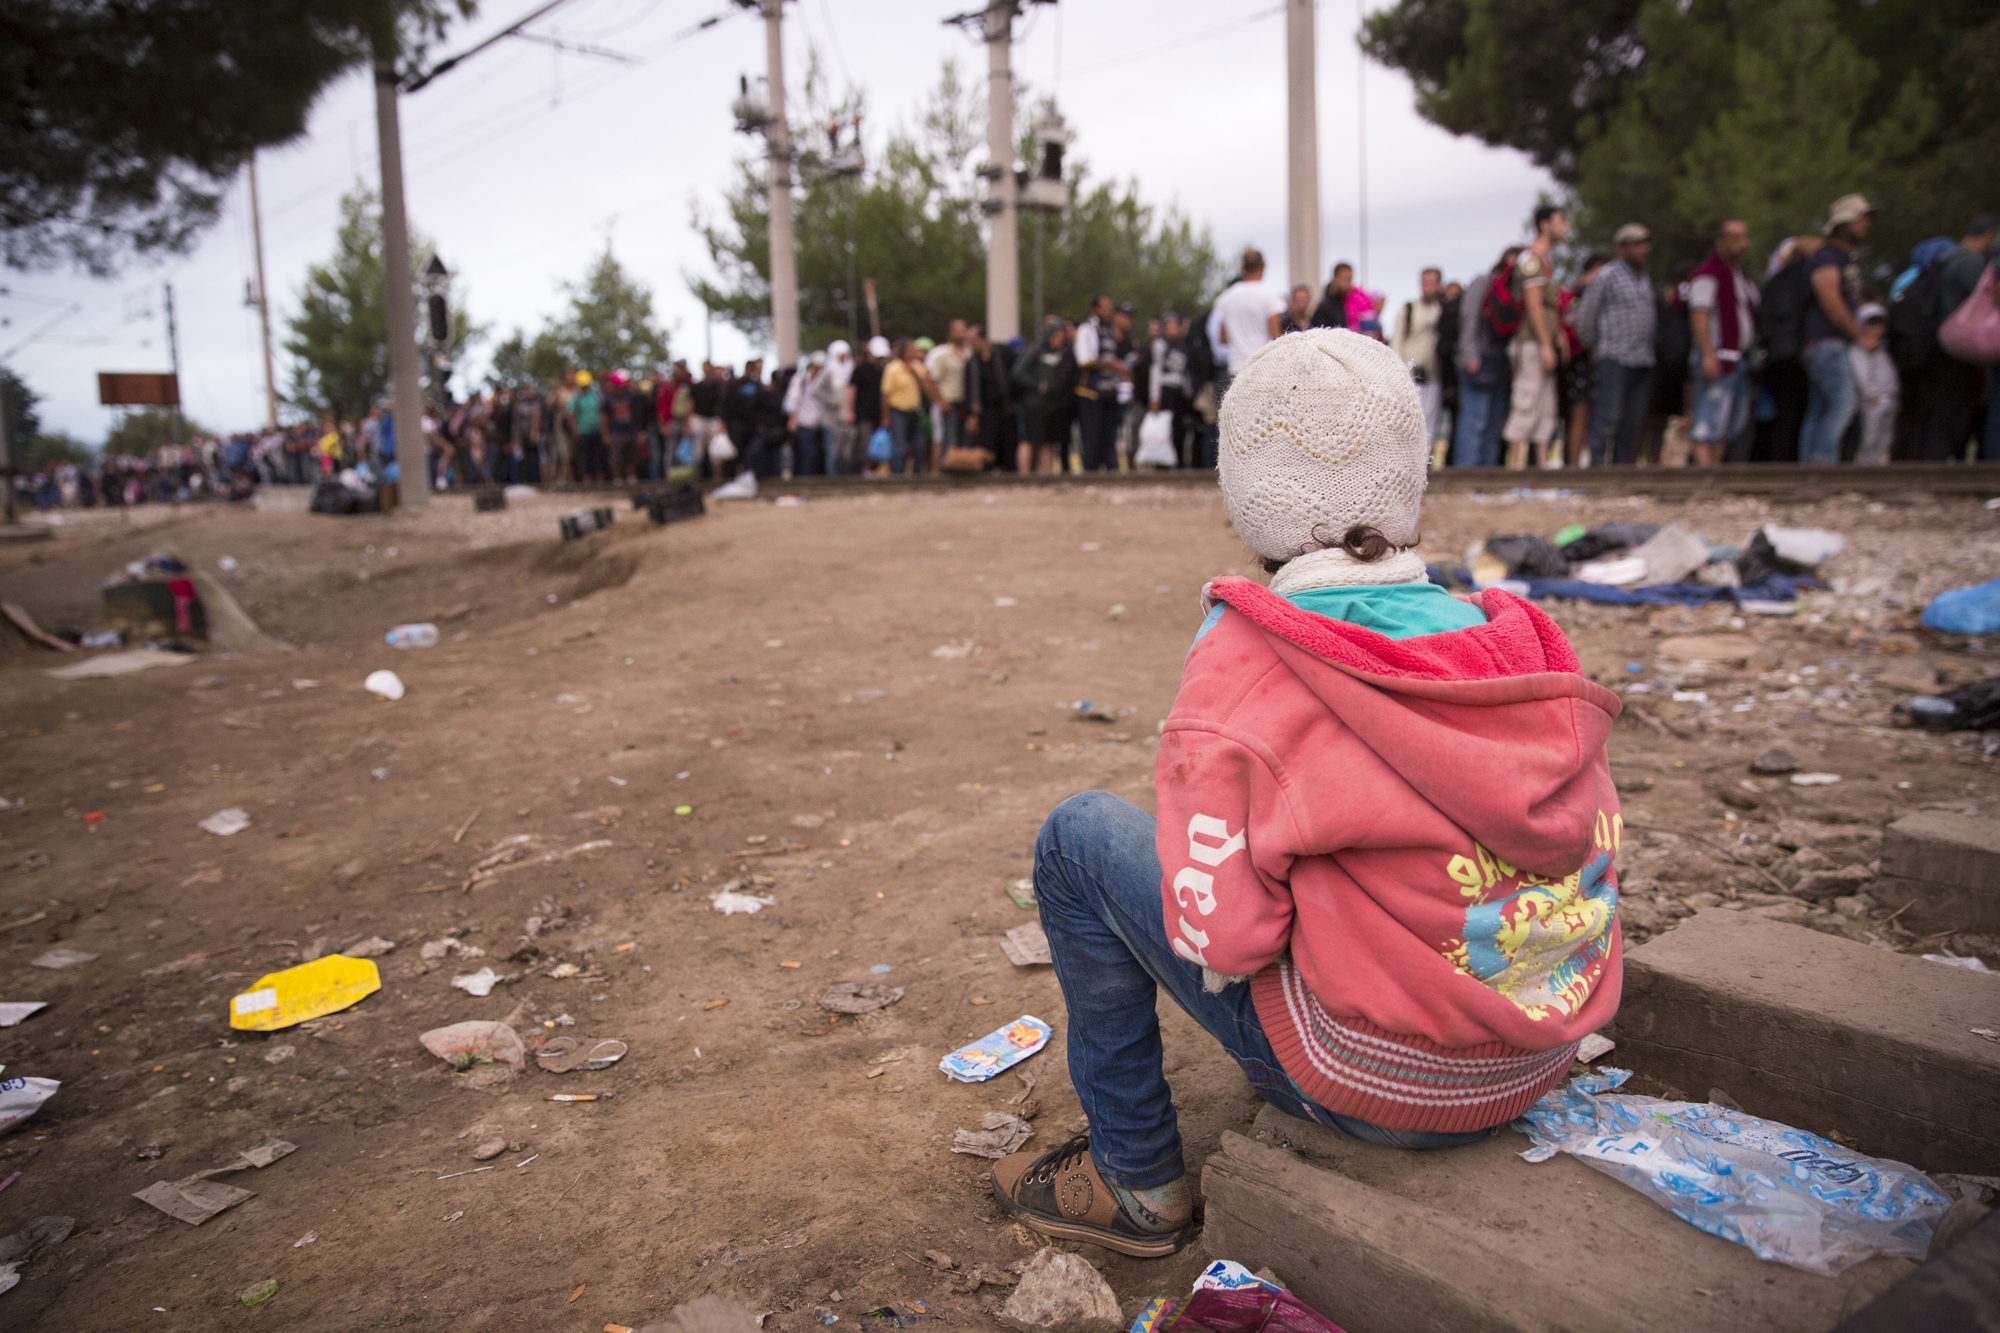 Refugees and migrants wait at the Macedonia border near the village of Idomeni, Greece, 24 August 2015.